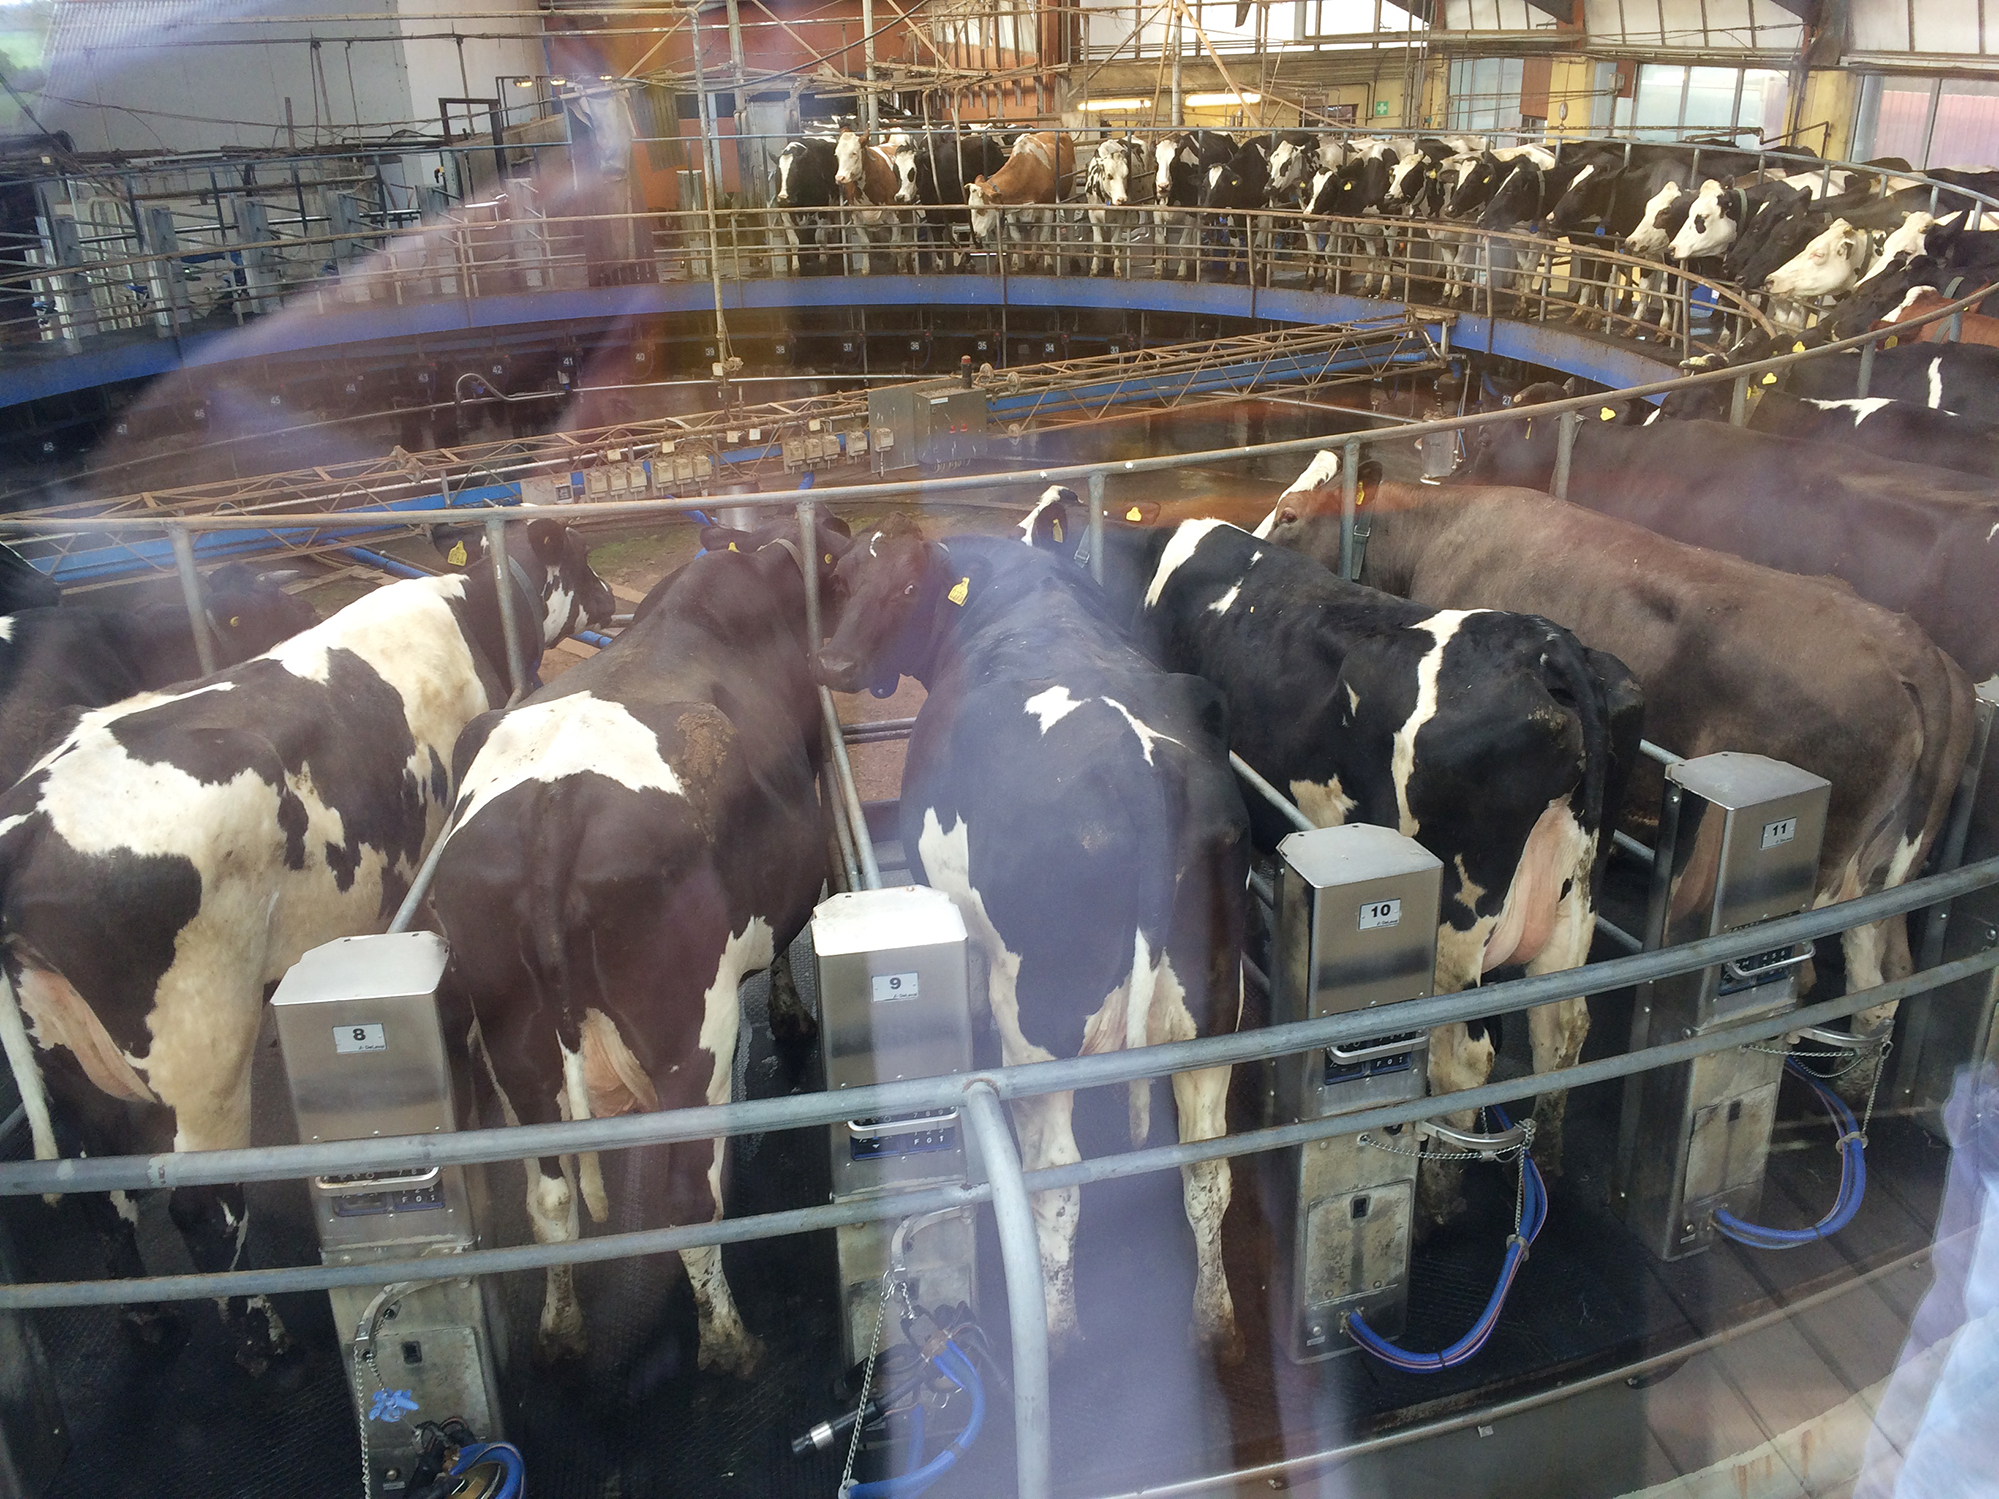 The cows enter a carousel twice a day to be milked